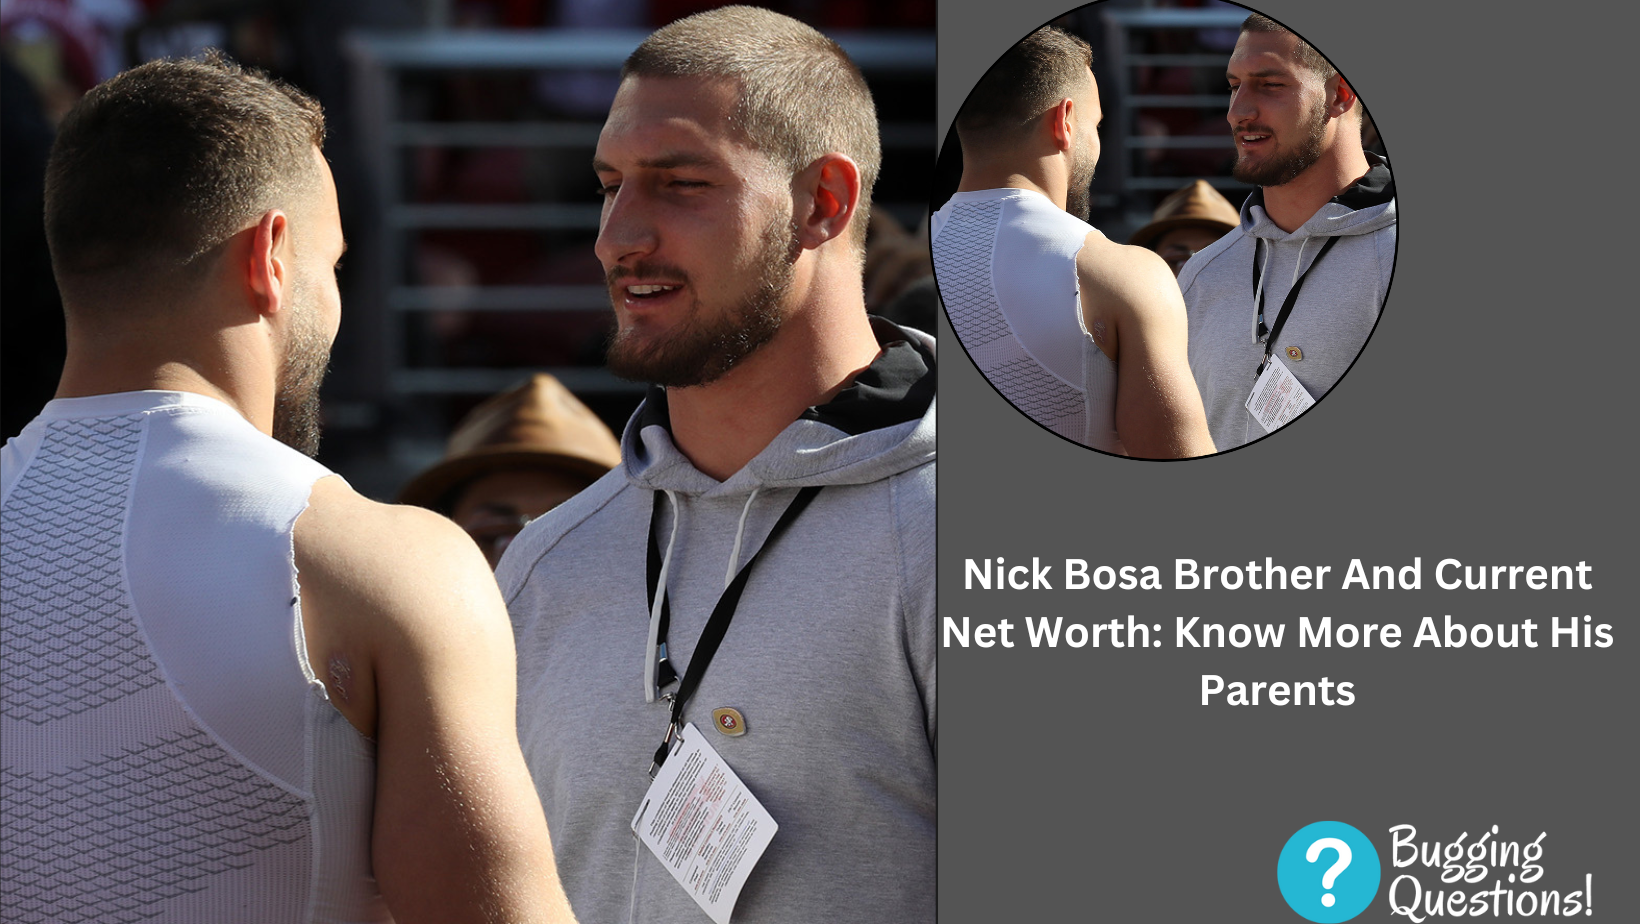 Nick Bosa Brother And Current Net Worth